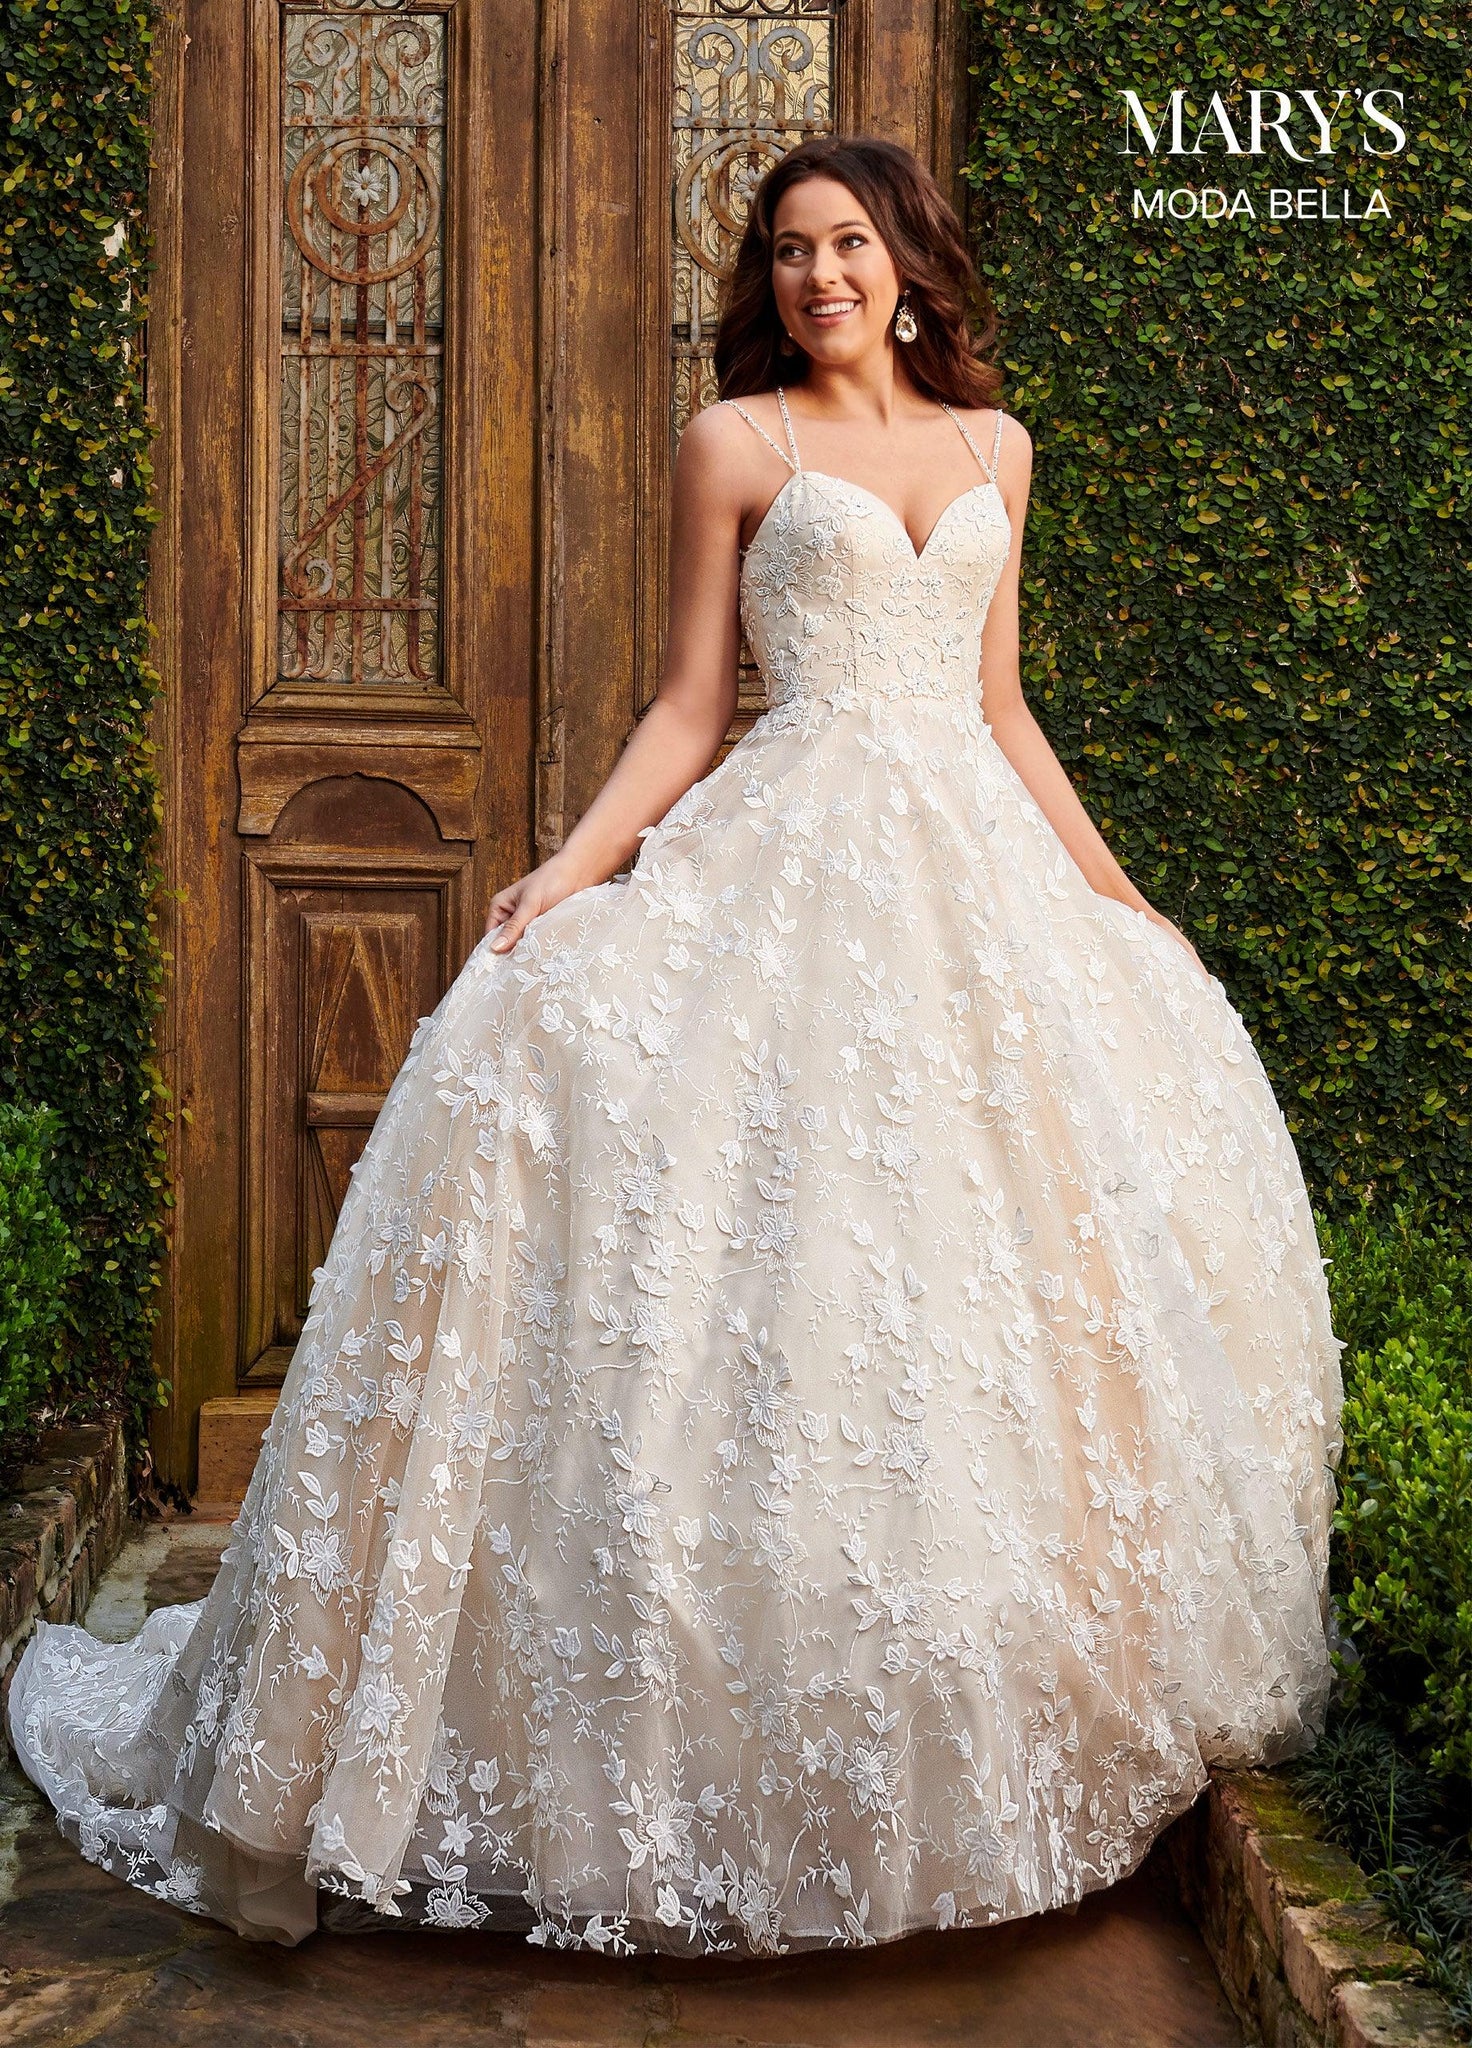 MARY'S BRIDAL - Florence - Adore Bridal and Occasion Wear